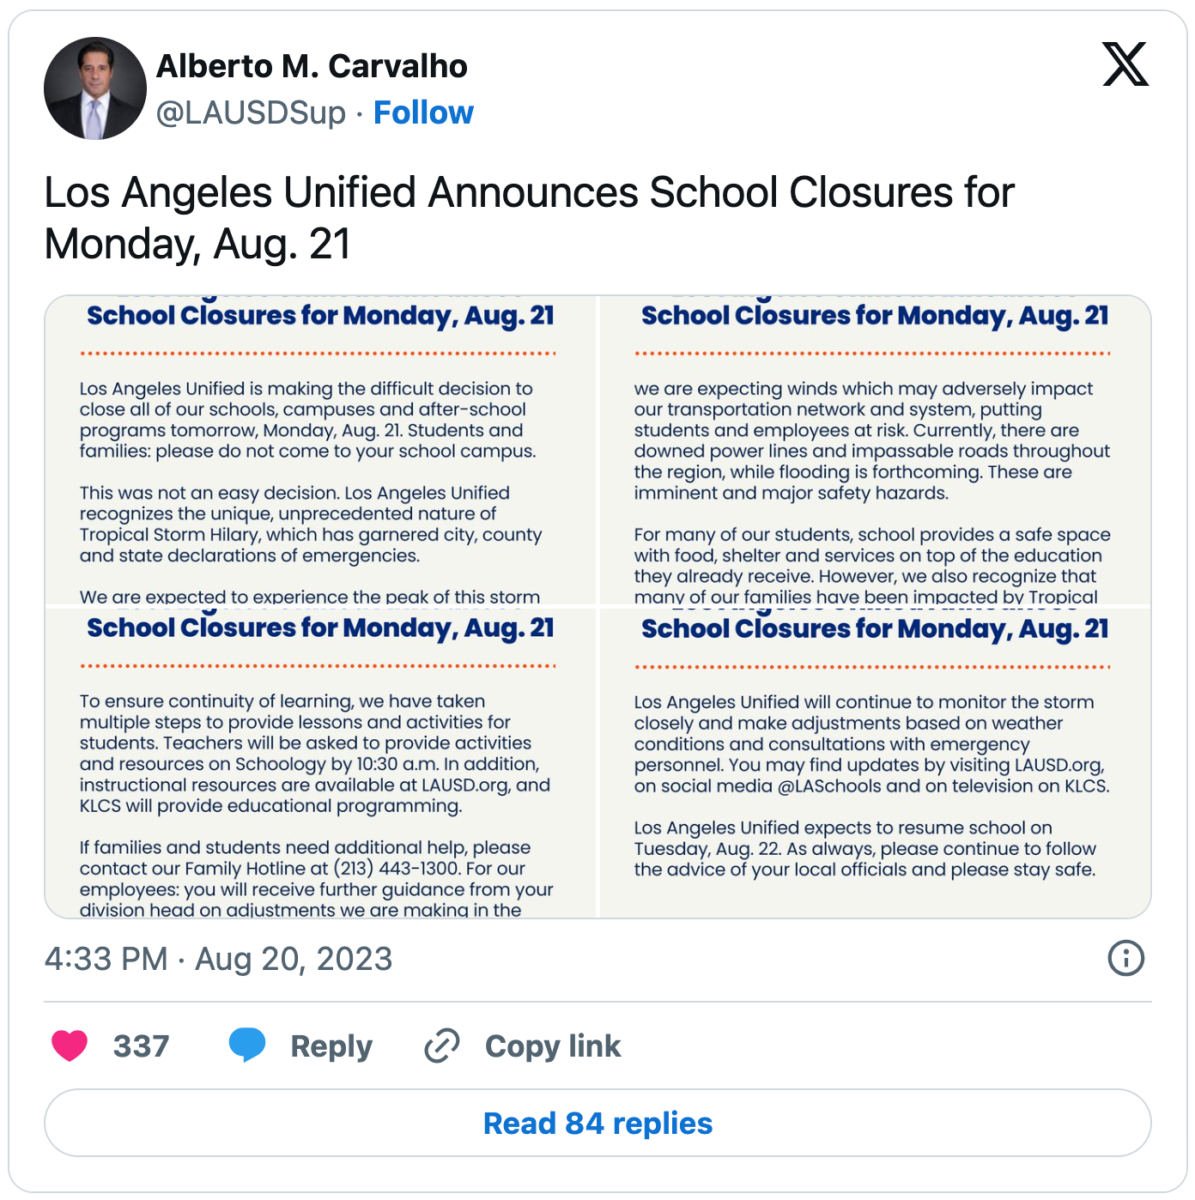 Tweet+from+LAUSD+Superintendent+Alberto+Carvalho+announcing+that+all+schools+will+be+closed+on+Monday+Aug.+21+due+to+the+impact+of+Tropical+Storm+Hilary.